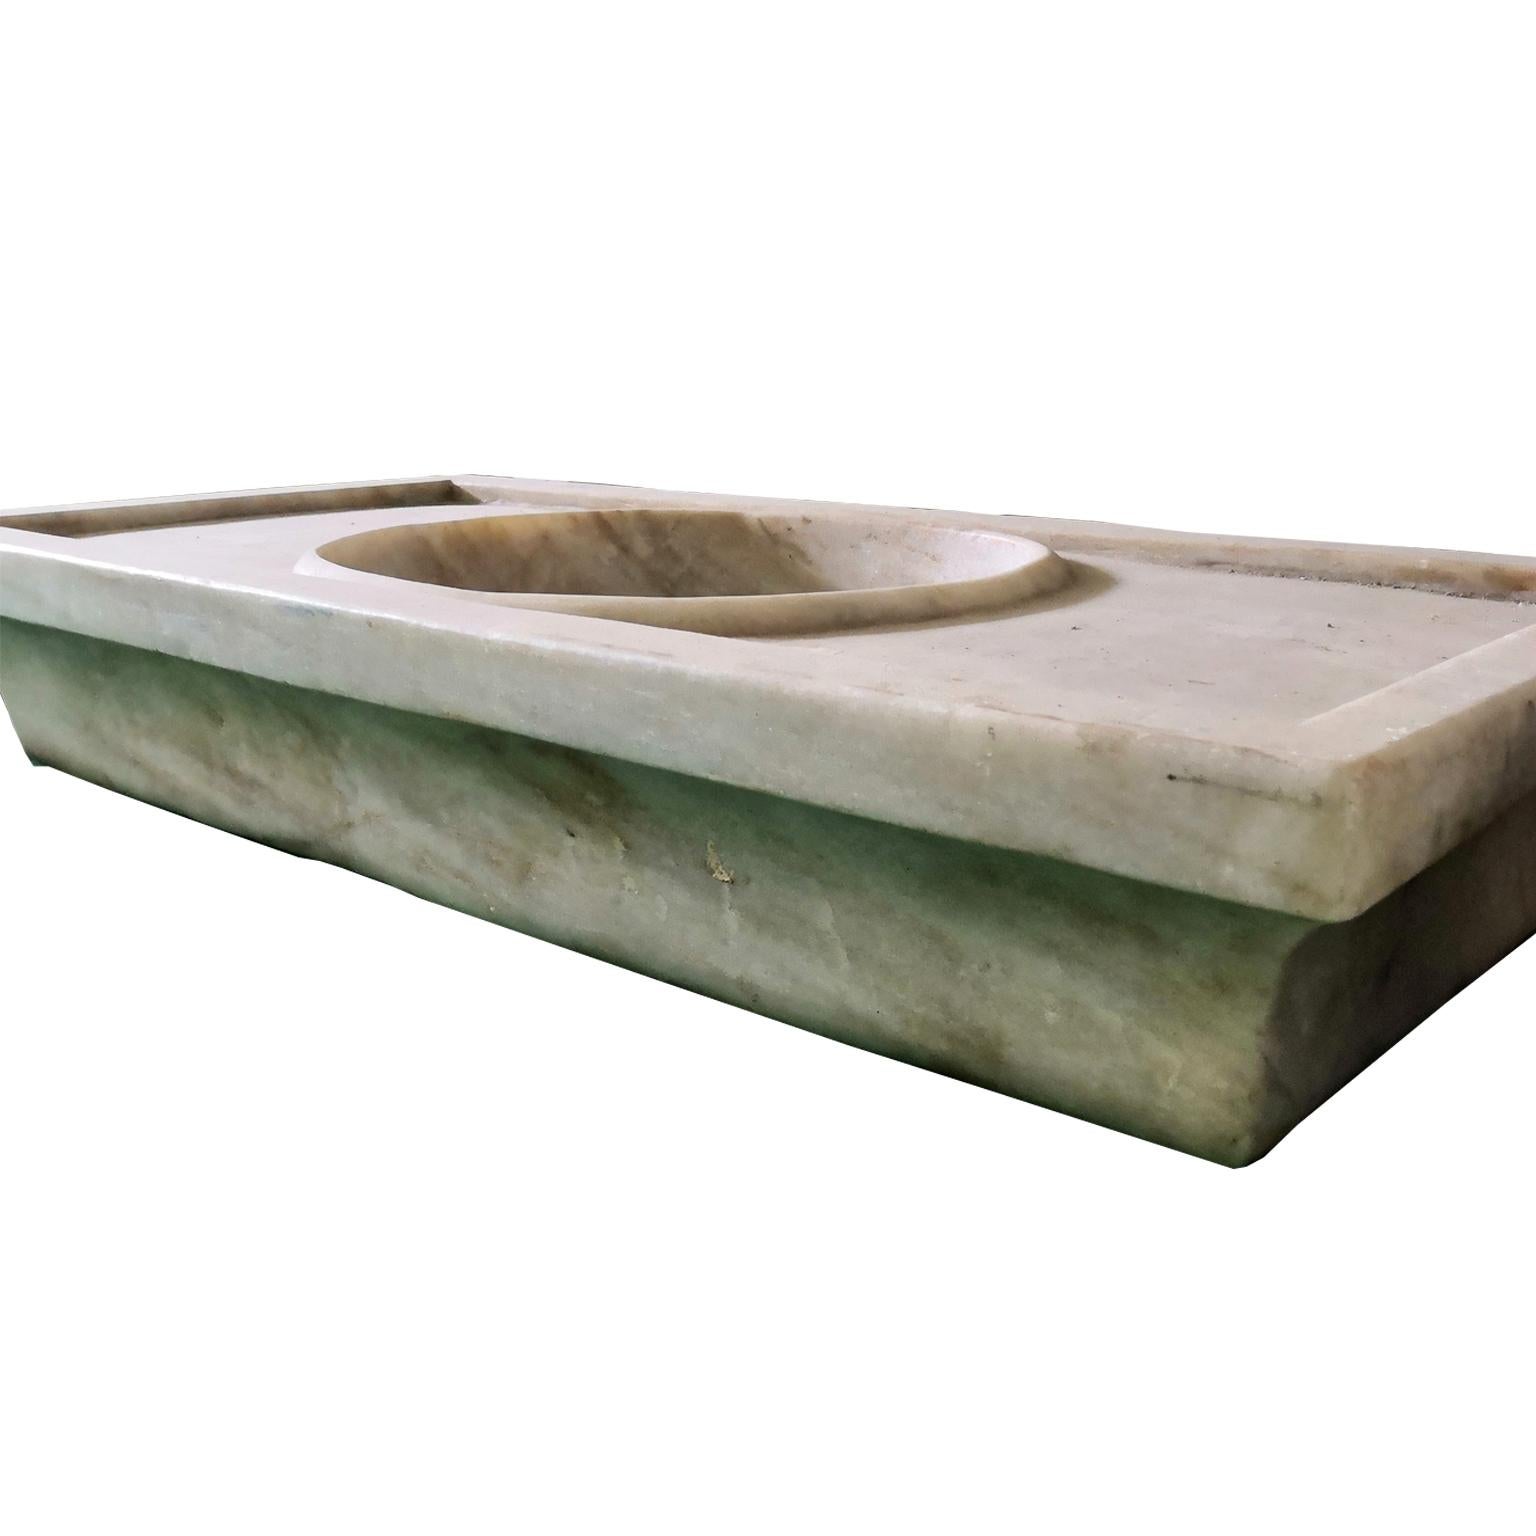 This timeless beautiful Italian classical sink is cut from one single block of white marble, these designs have not changed since Greek and Roman times, it carries superb artistic merit easily fitting in with old and new buildings. It also makes an